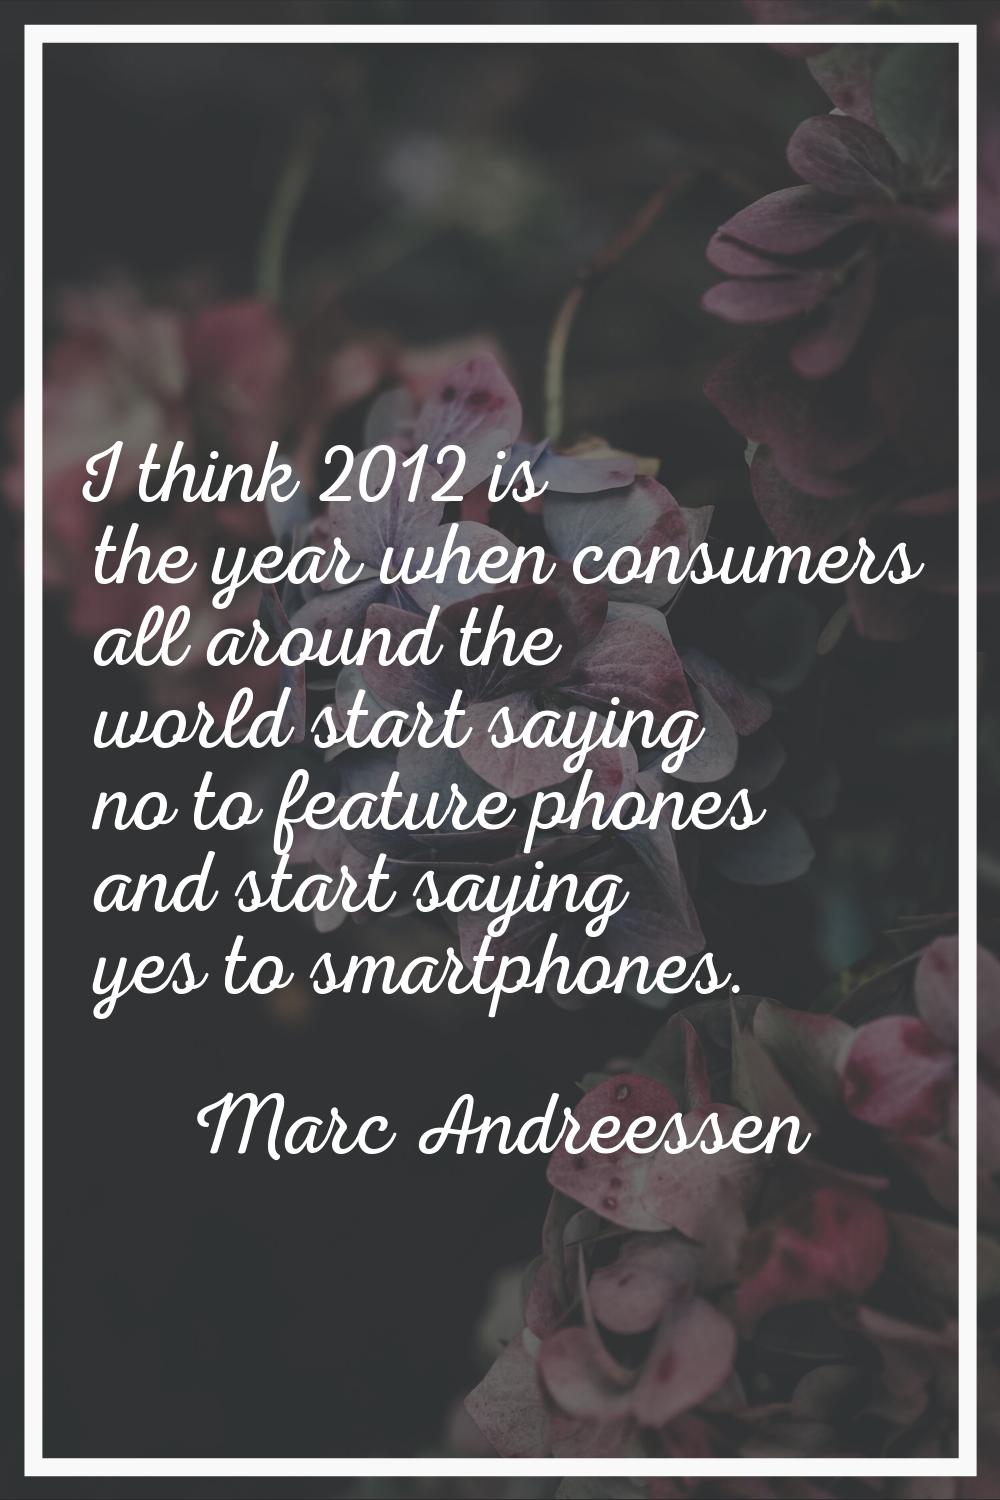 I think 2012 is the year when consumers all around the world start saying no to feature phones and 